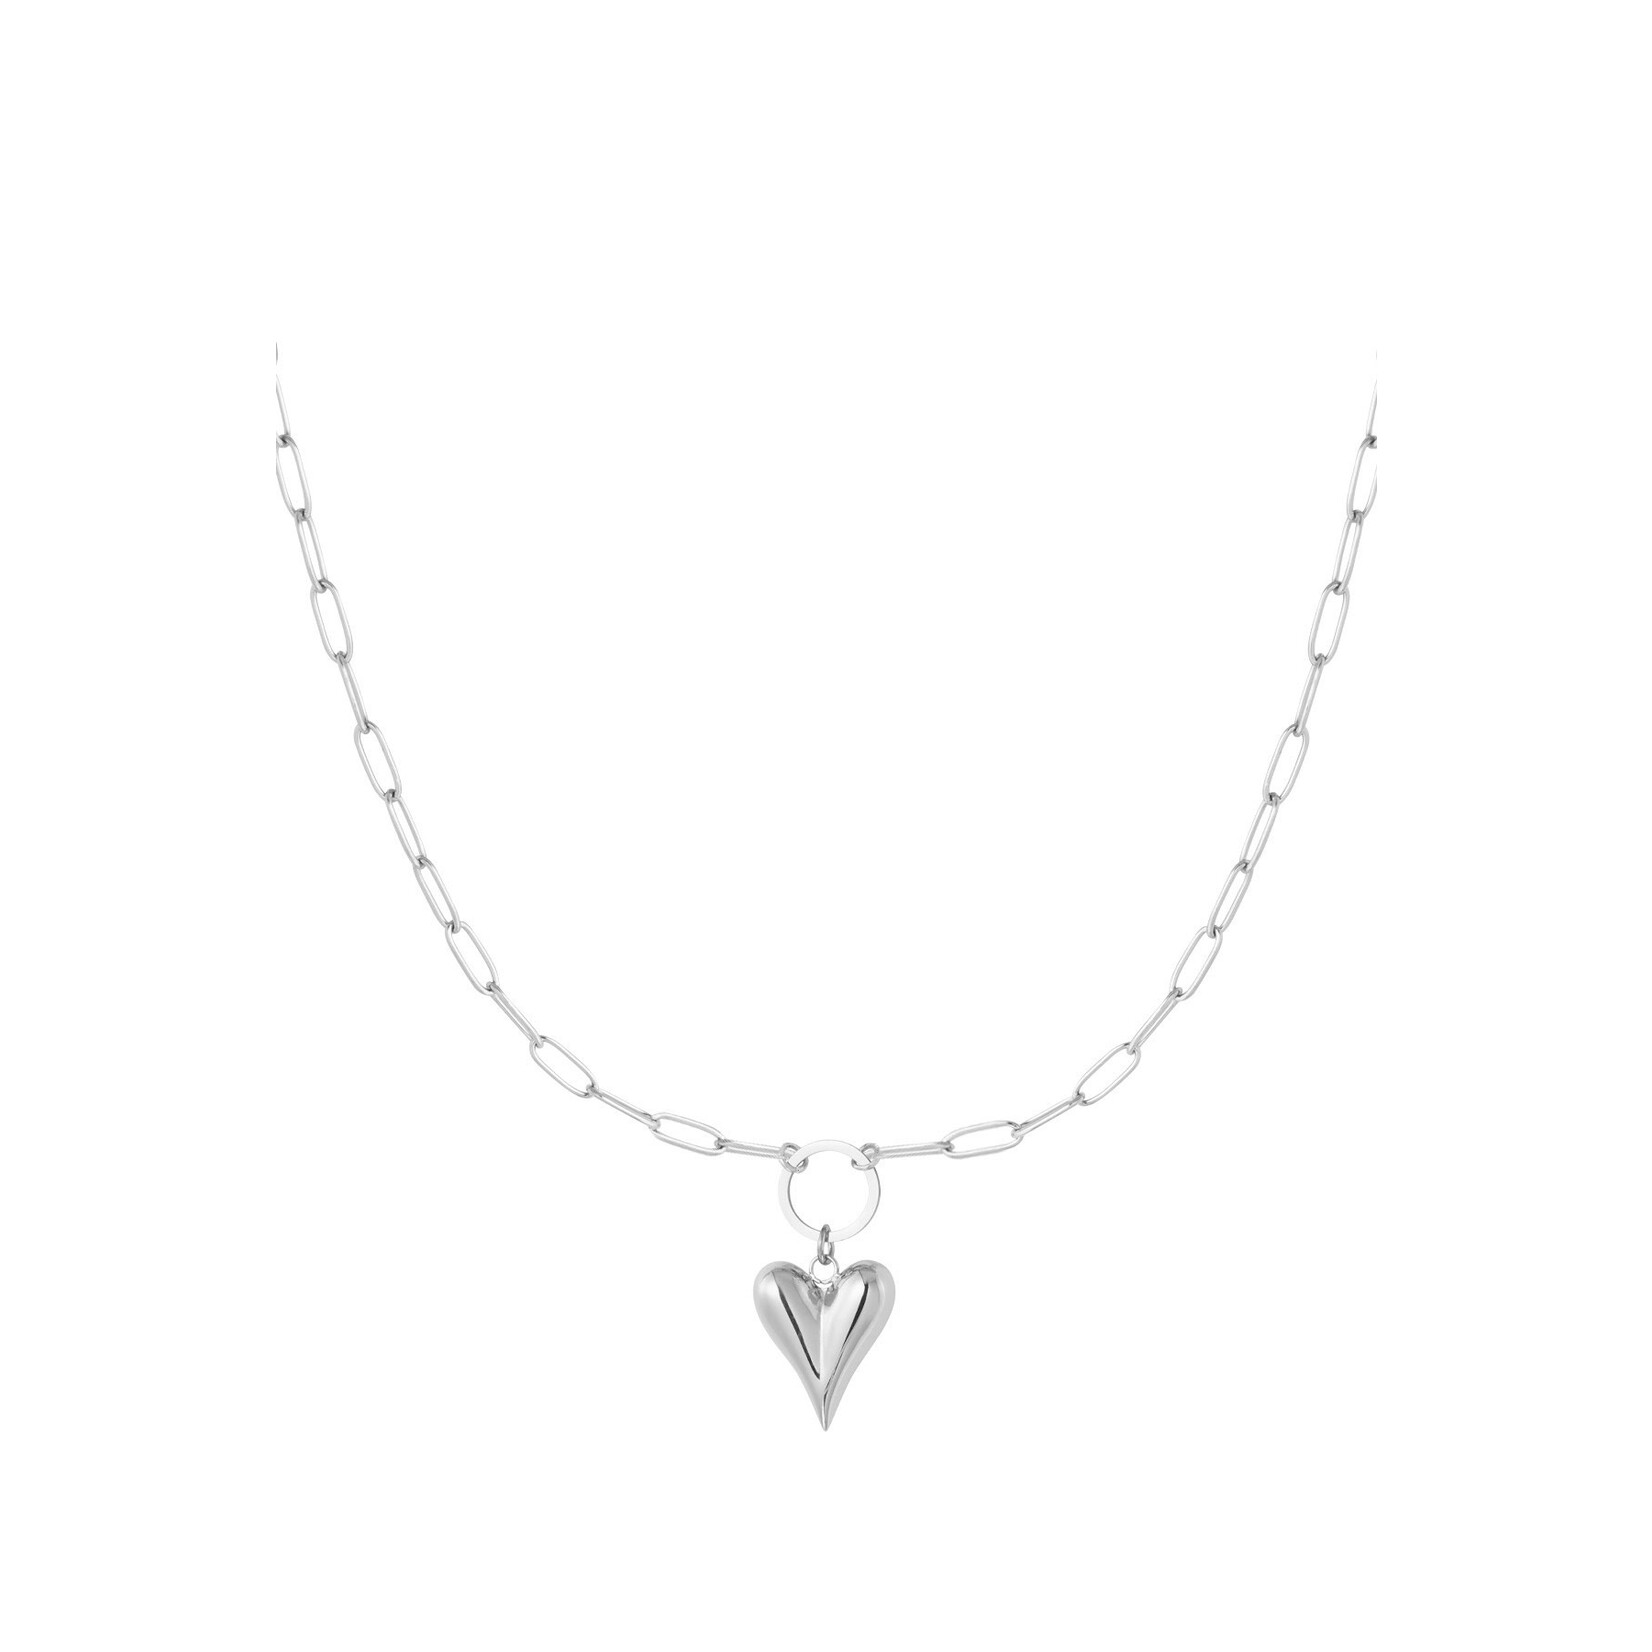 More the Firm Schakelketting iconic heart